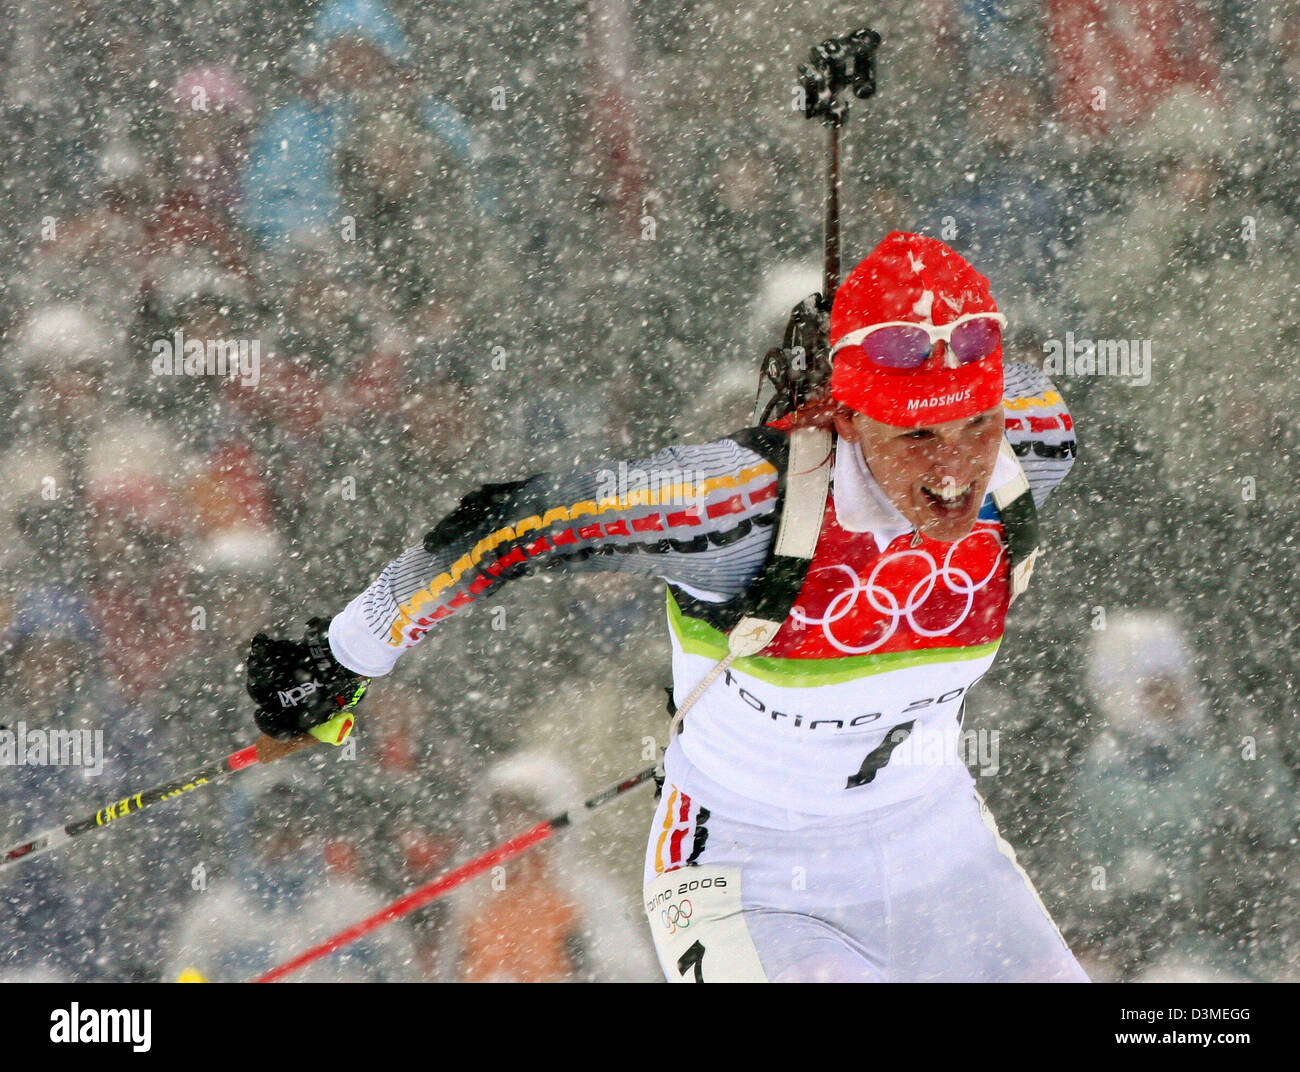 (dpa) - German biathlete Kati Wilhelm photographed while it snows during the women's 10km pursuit race at the Olympic track in San Sicario, Italy, Saturday 18 February 2006. Wilhelm won gold. Photo: Martin Schutt Stock Photo